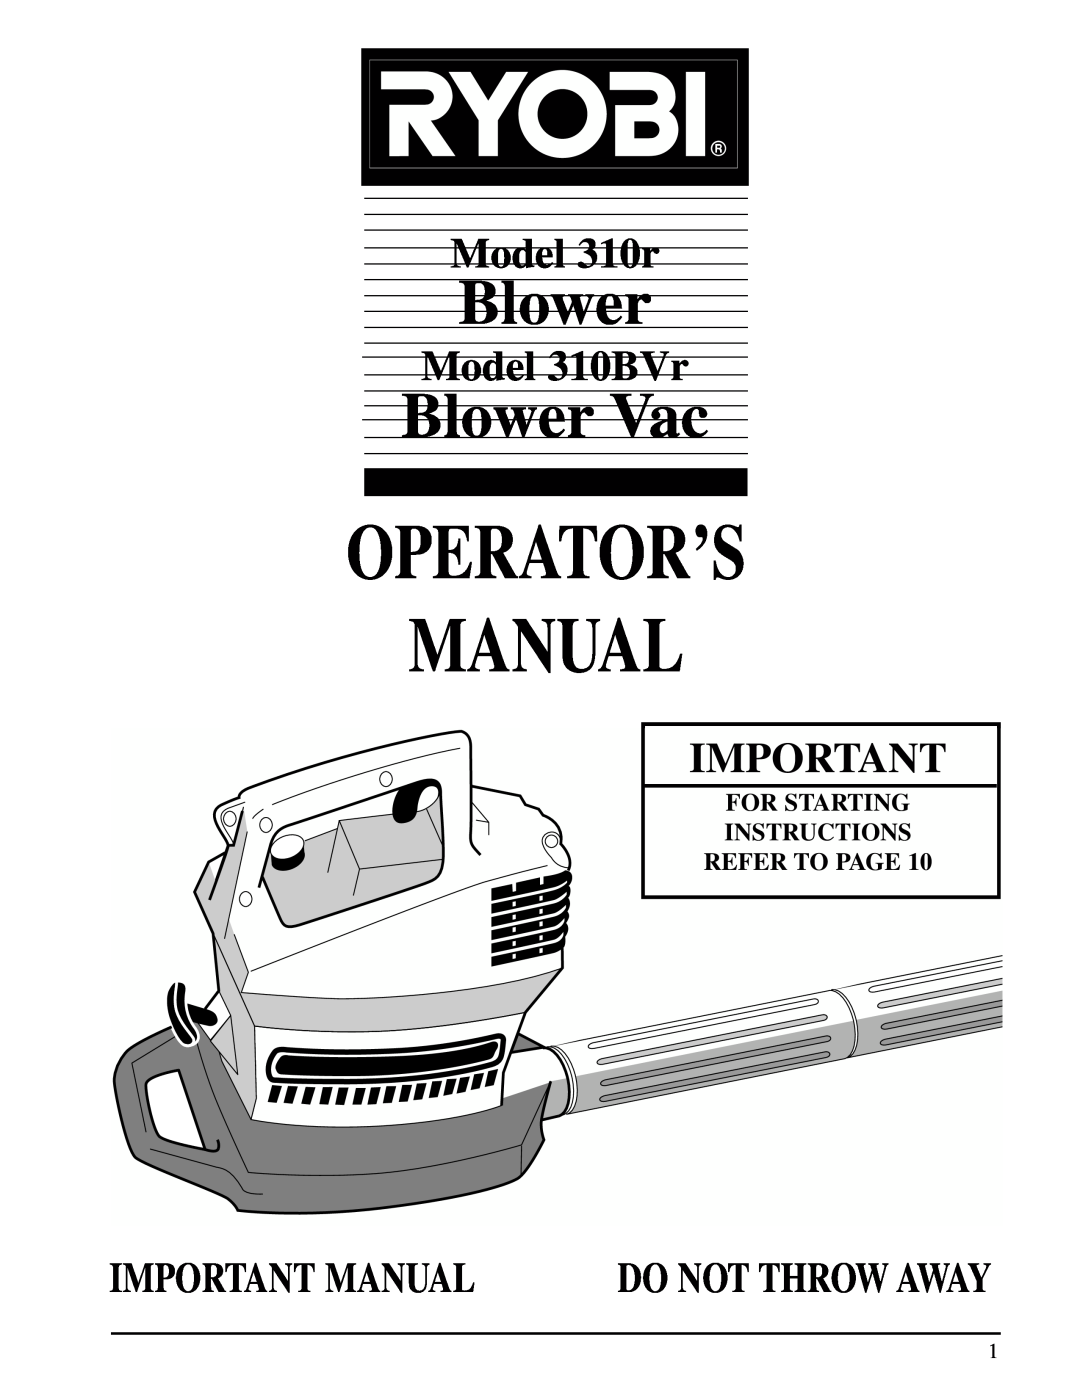 Ryobi manual For Starting Instructions Refer To Page, Operator’S Manual, Blower Vac, Model 310r, Model 310BVr 